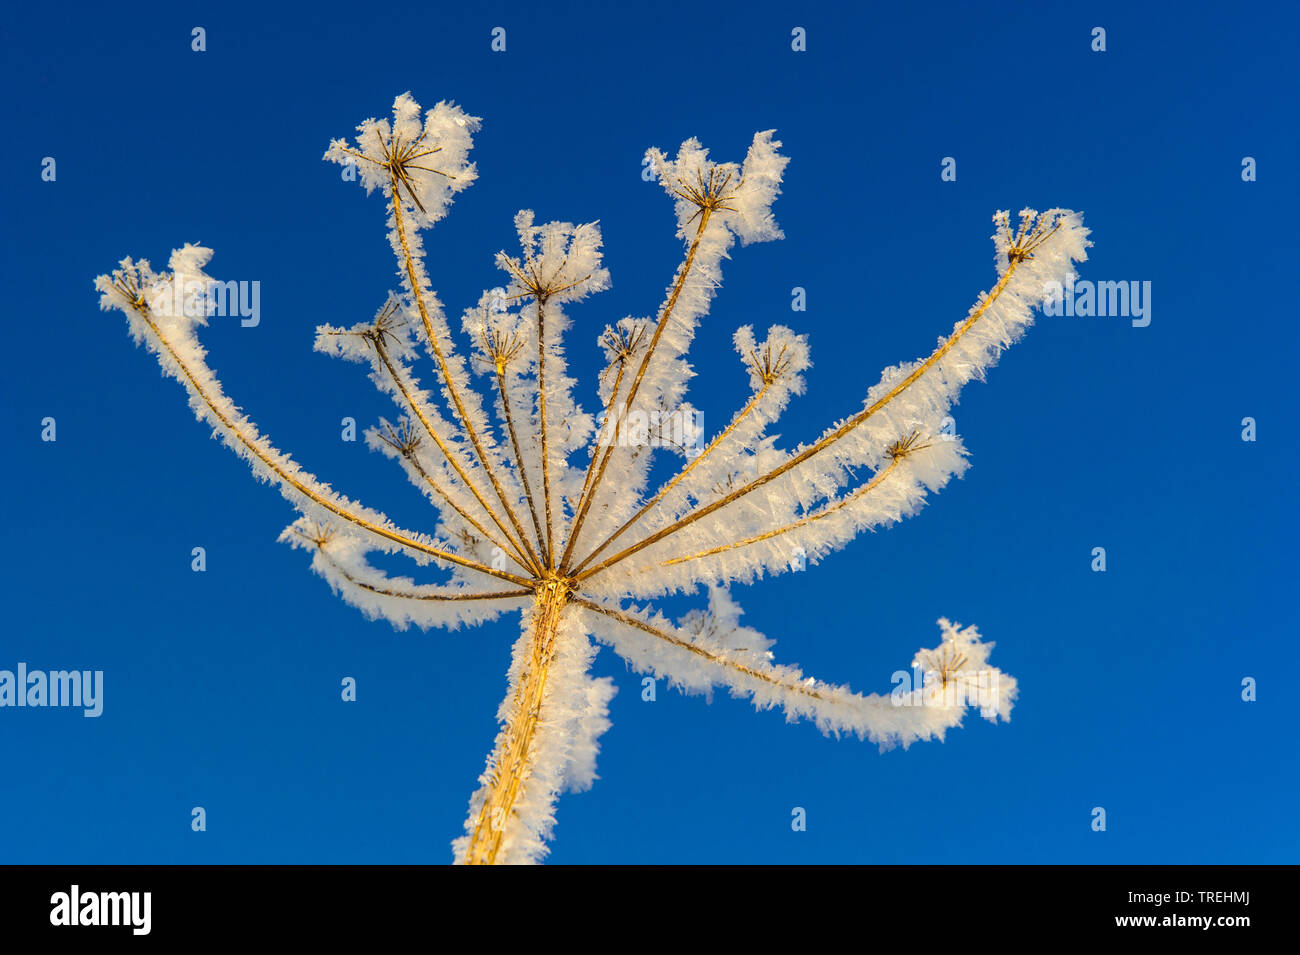 hoar frost an an umbellifer, Germany, Lower Saxony Stock Photo